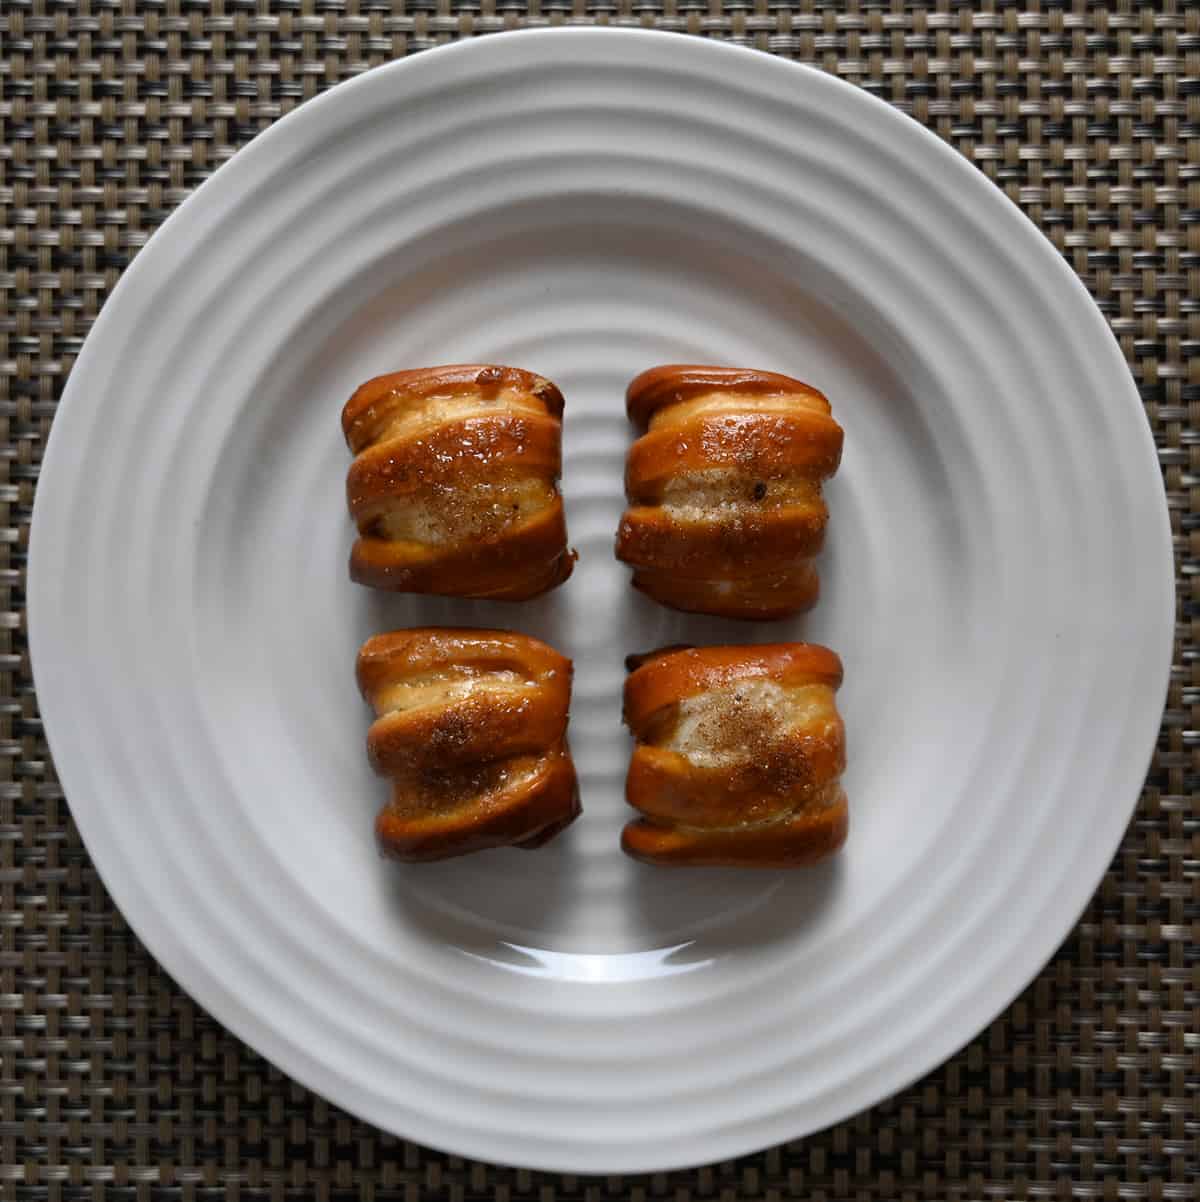 Top down image of four one-timer bites pretzels baked and served on a white plate.